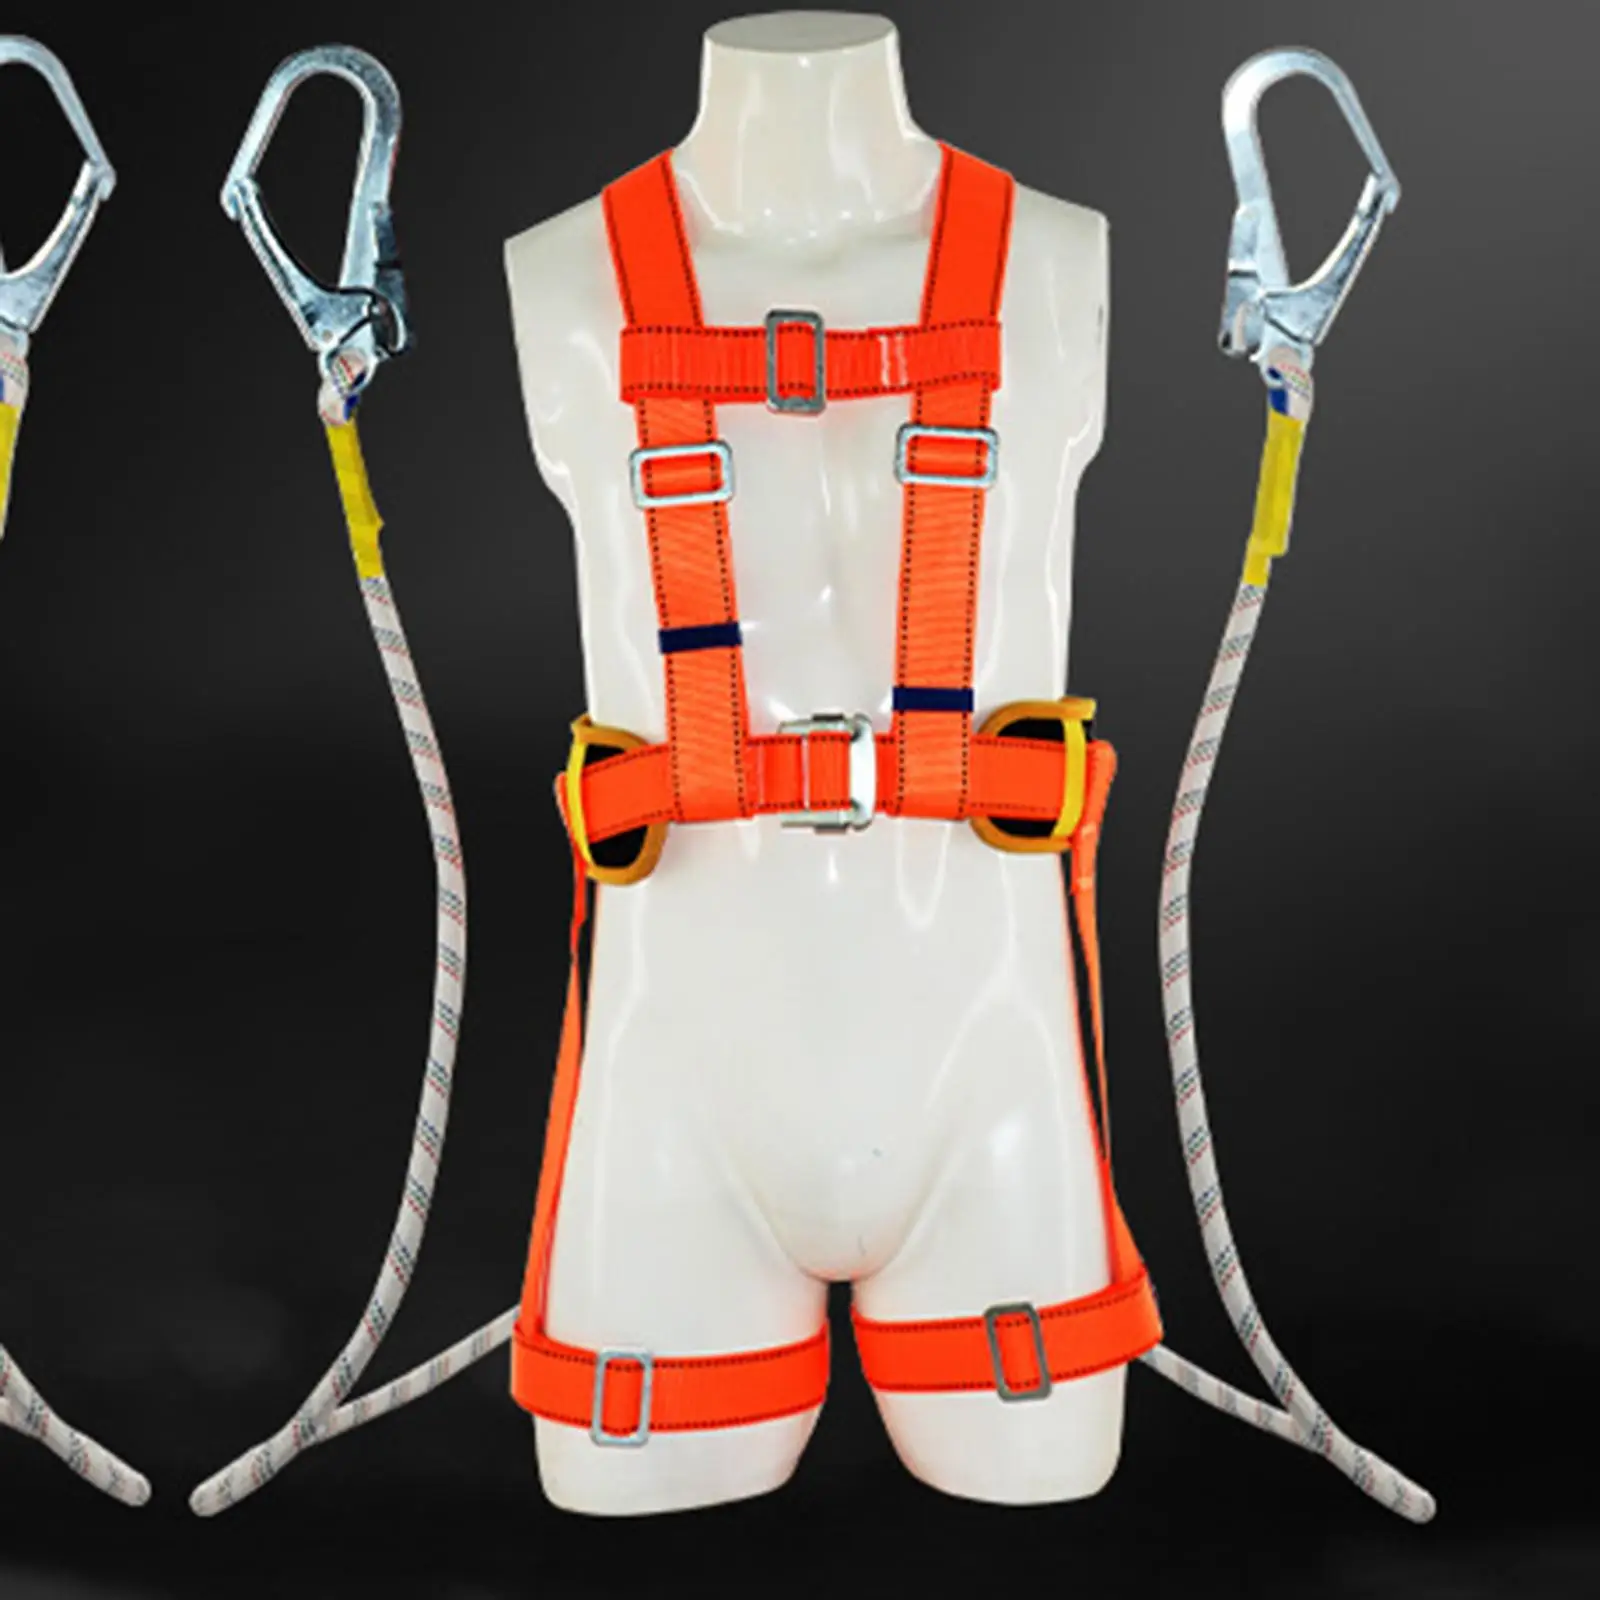 Fall Protection Safety Harness Professional Fall Arrest Portable Waist Pad High Altitude Safety Belt for Electricians Climbing